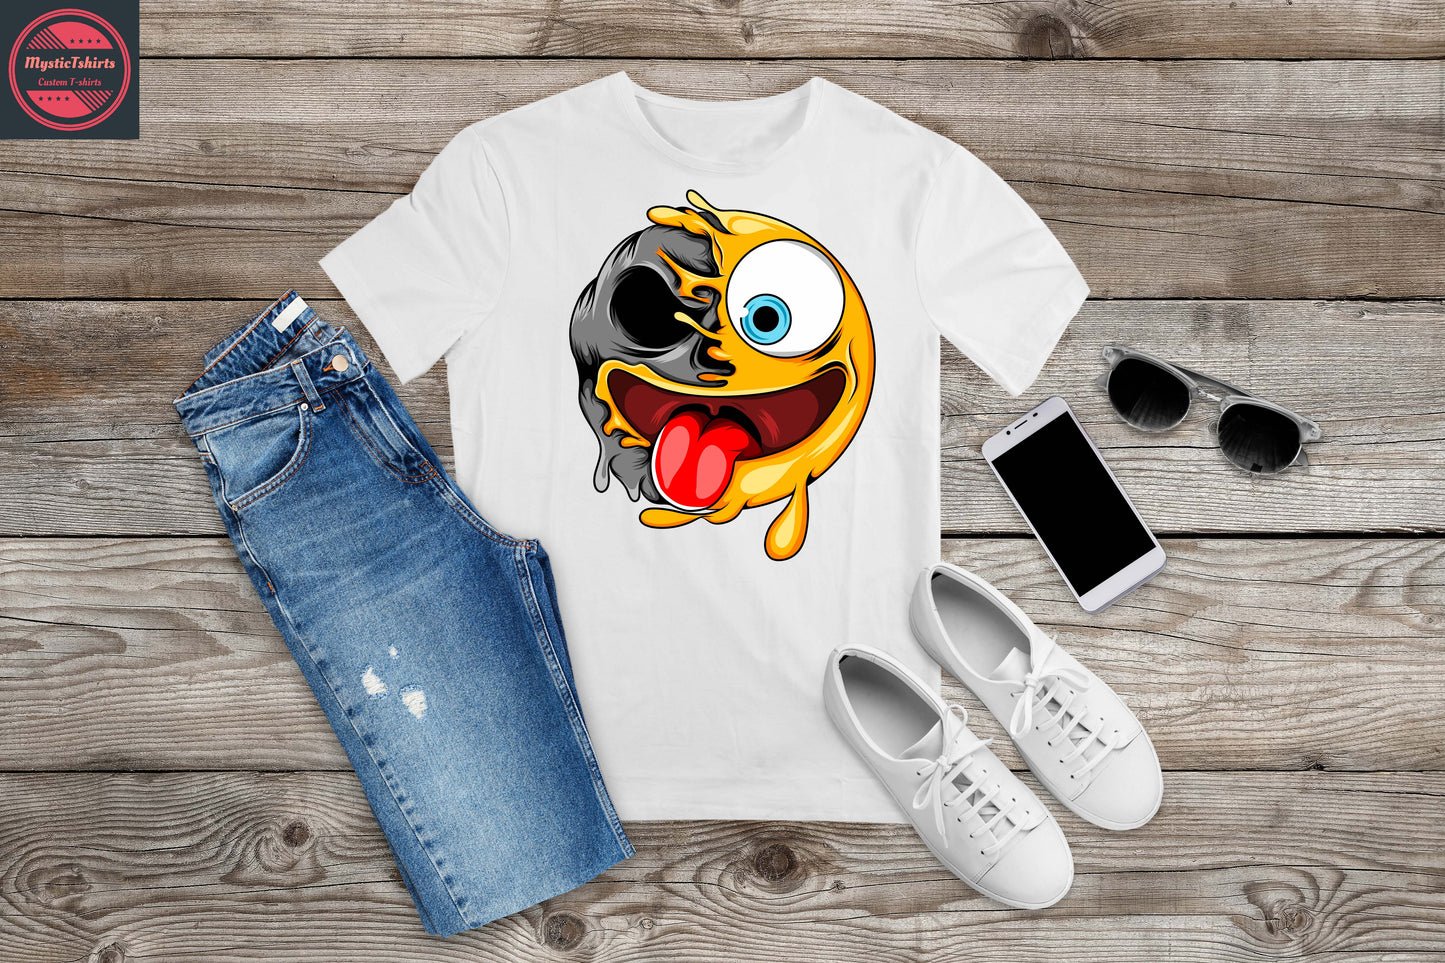 087. CRAZY FACE, Personalized T-Shirt, Custom Text, Make Your Own Shirt, Custom Tee